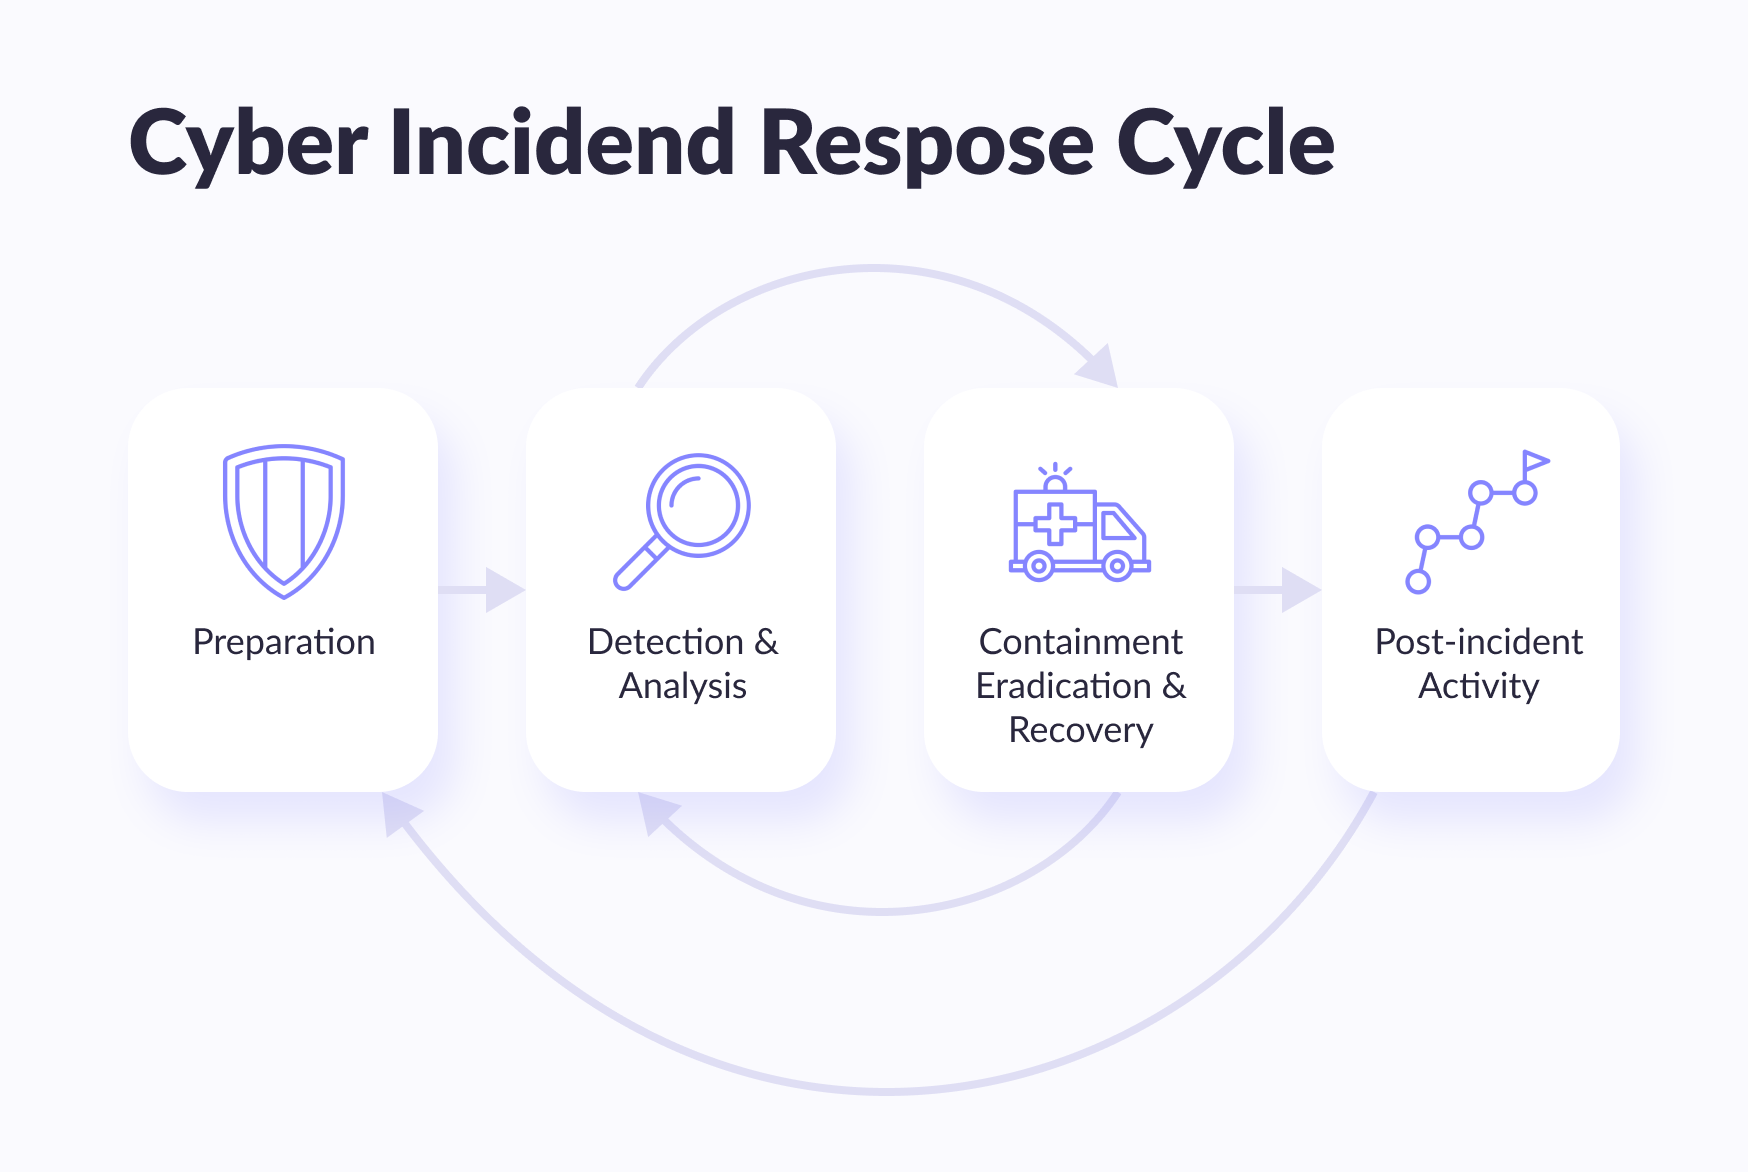 Cyber incident response cycle